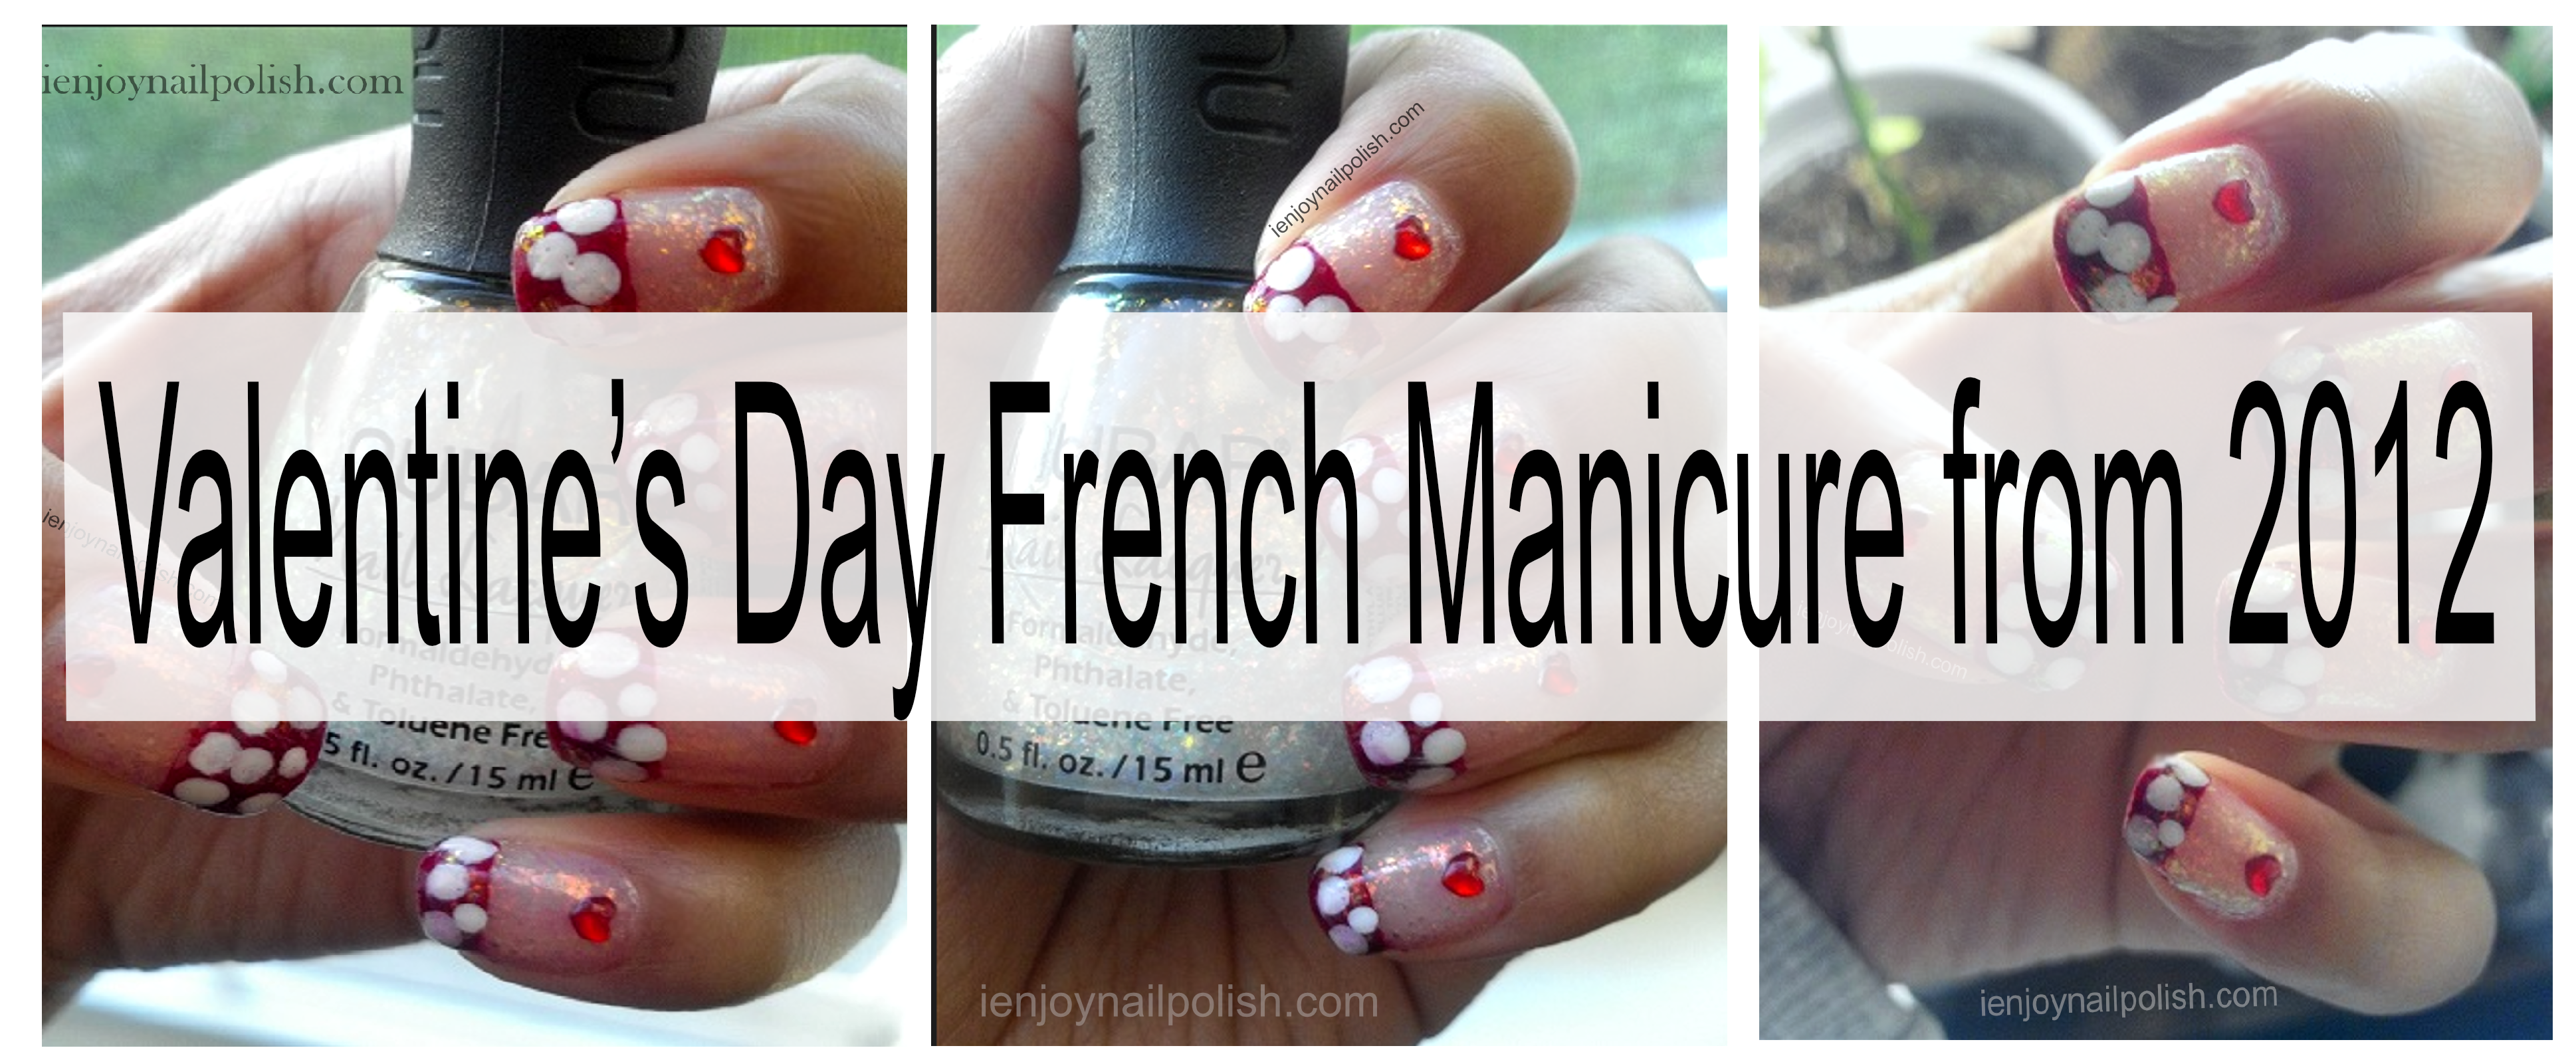 Valentine’s Day French Manicure from 2012